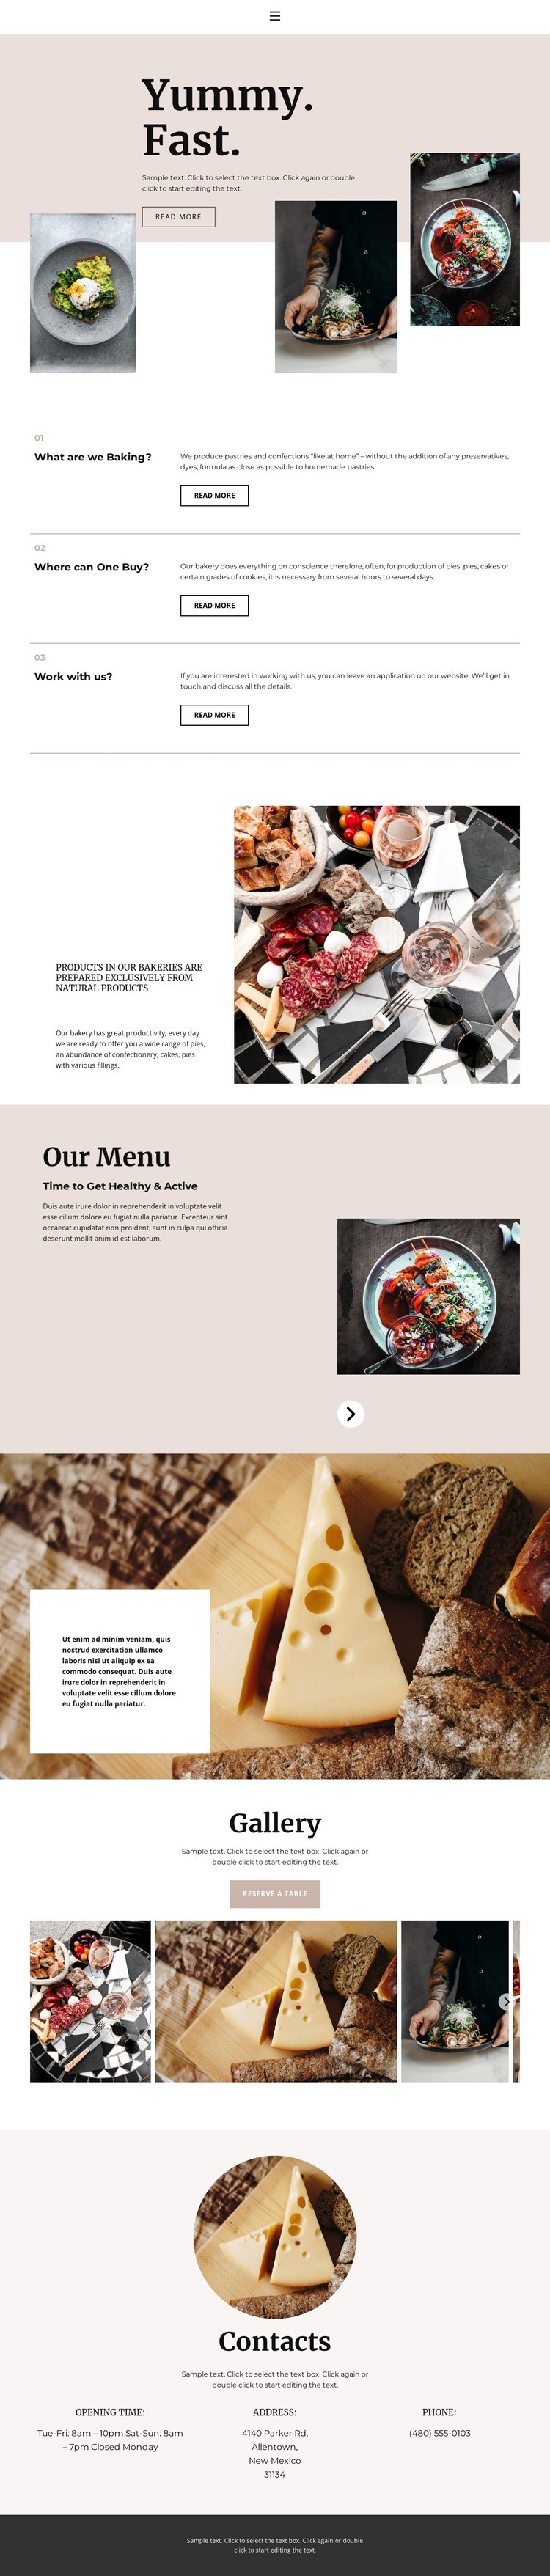 Own production Web Page Design